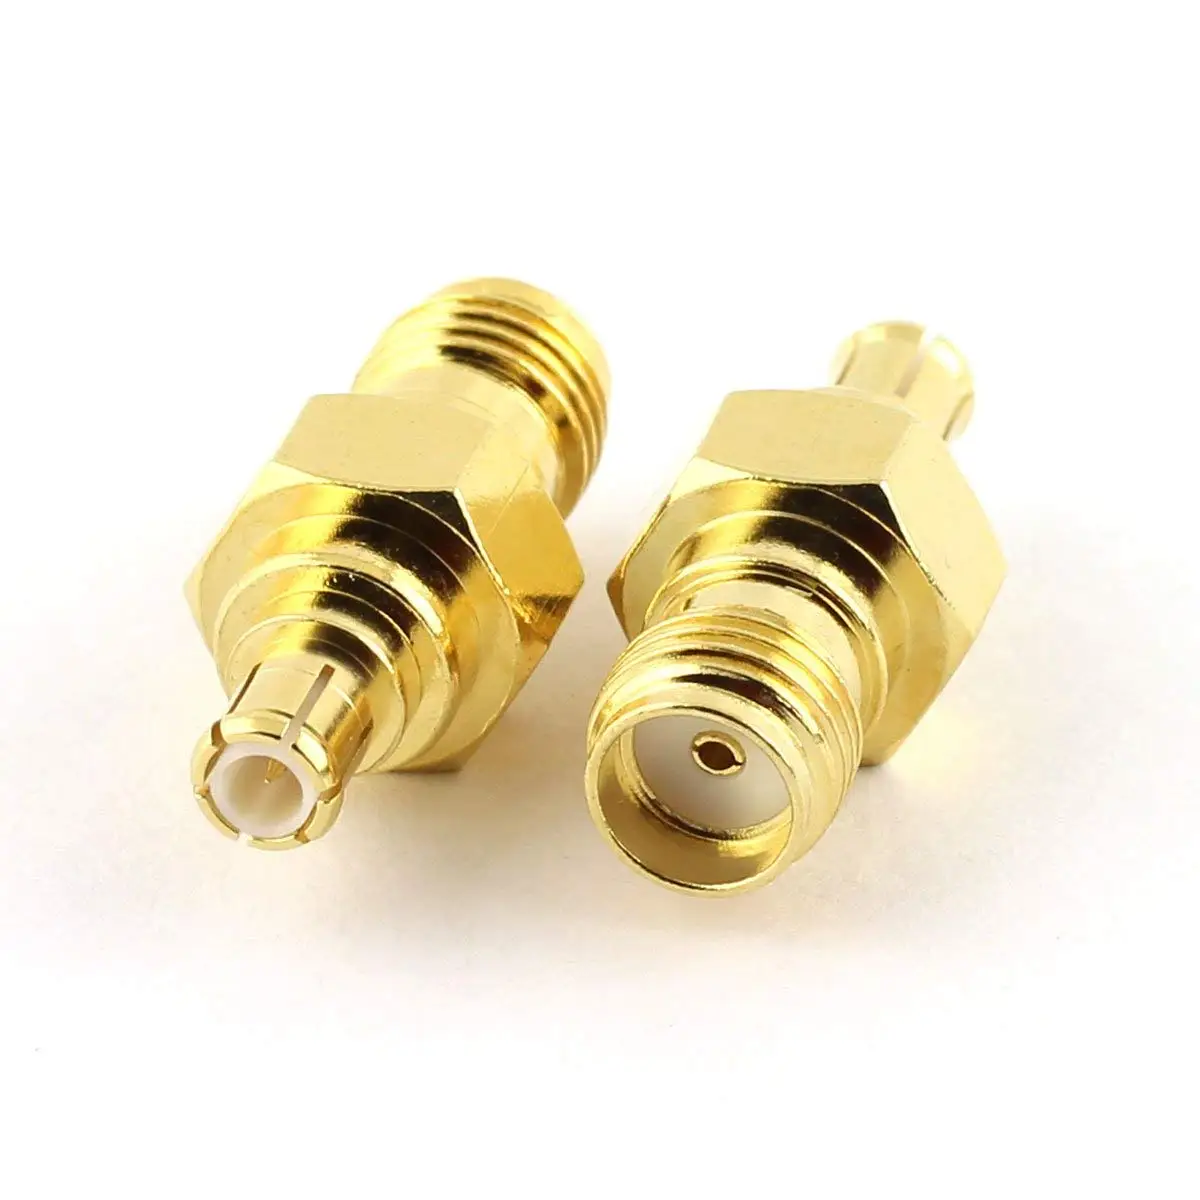 6.99. Maxmoral 2PCS SMA Female to MCX Male Connector RF Coax Coaxial Adapte...